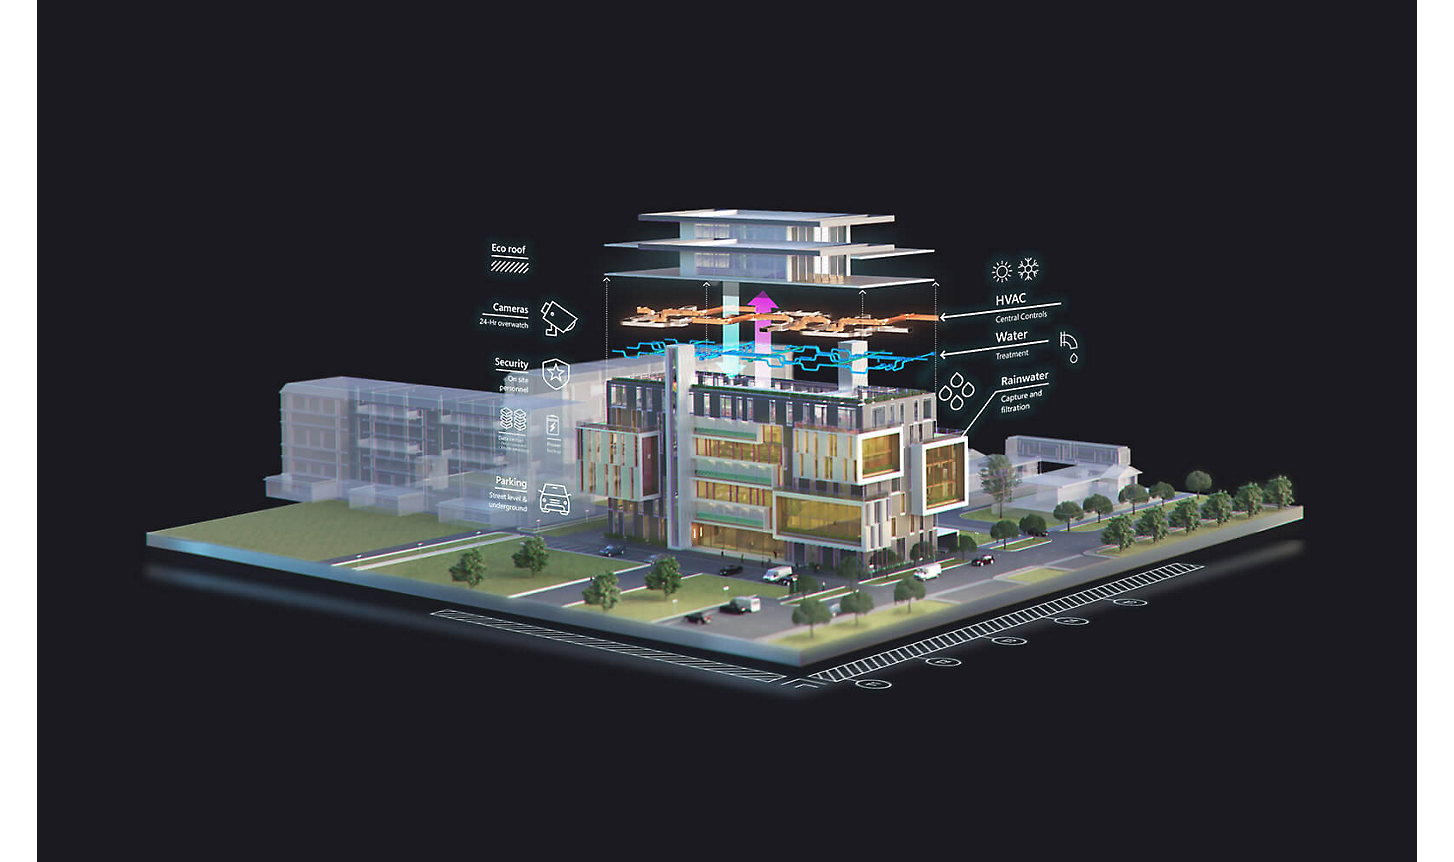 A 3D rendering of a building.